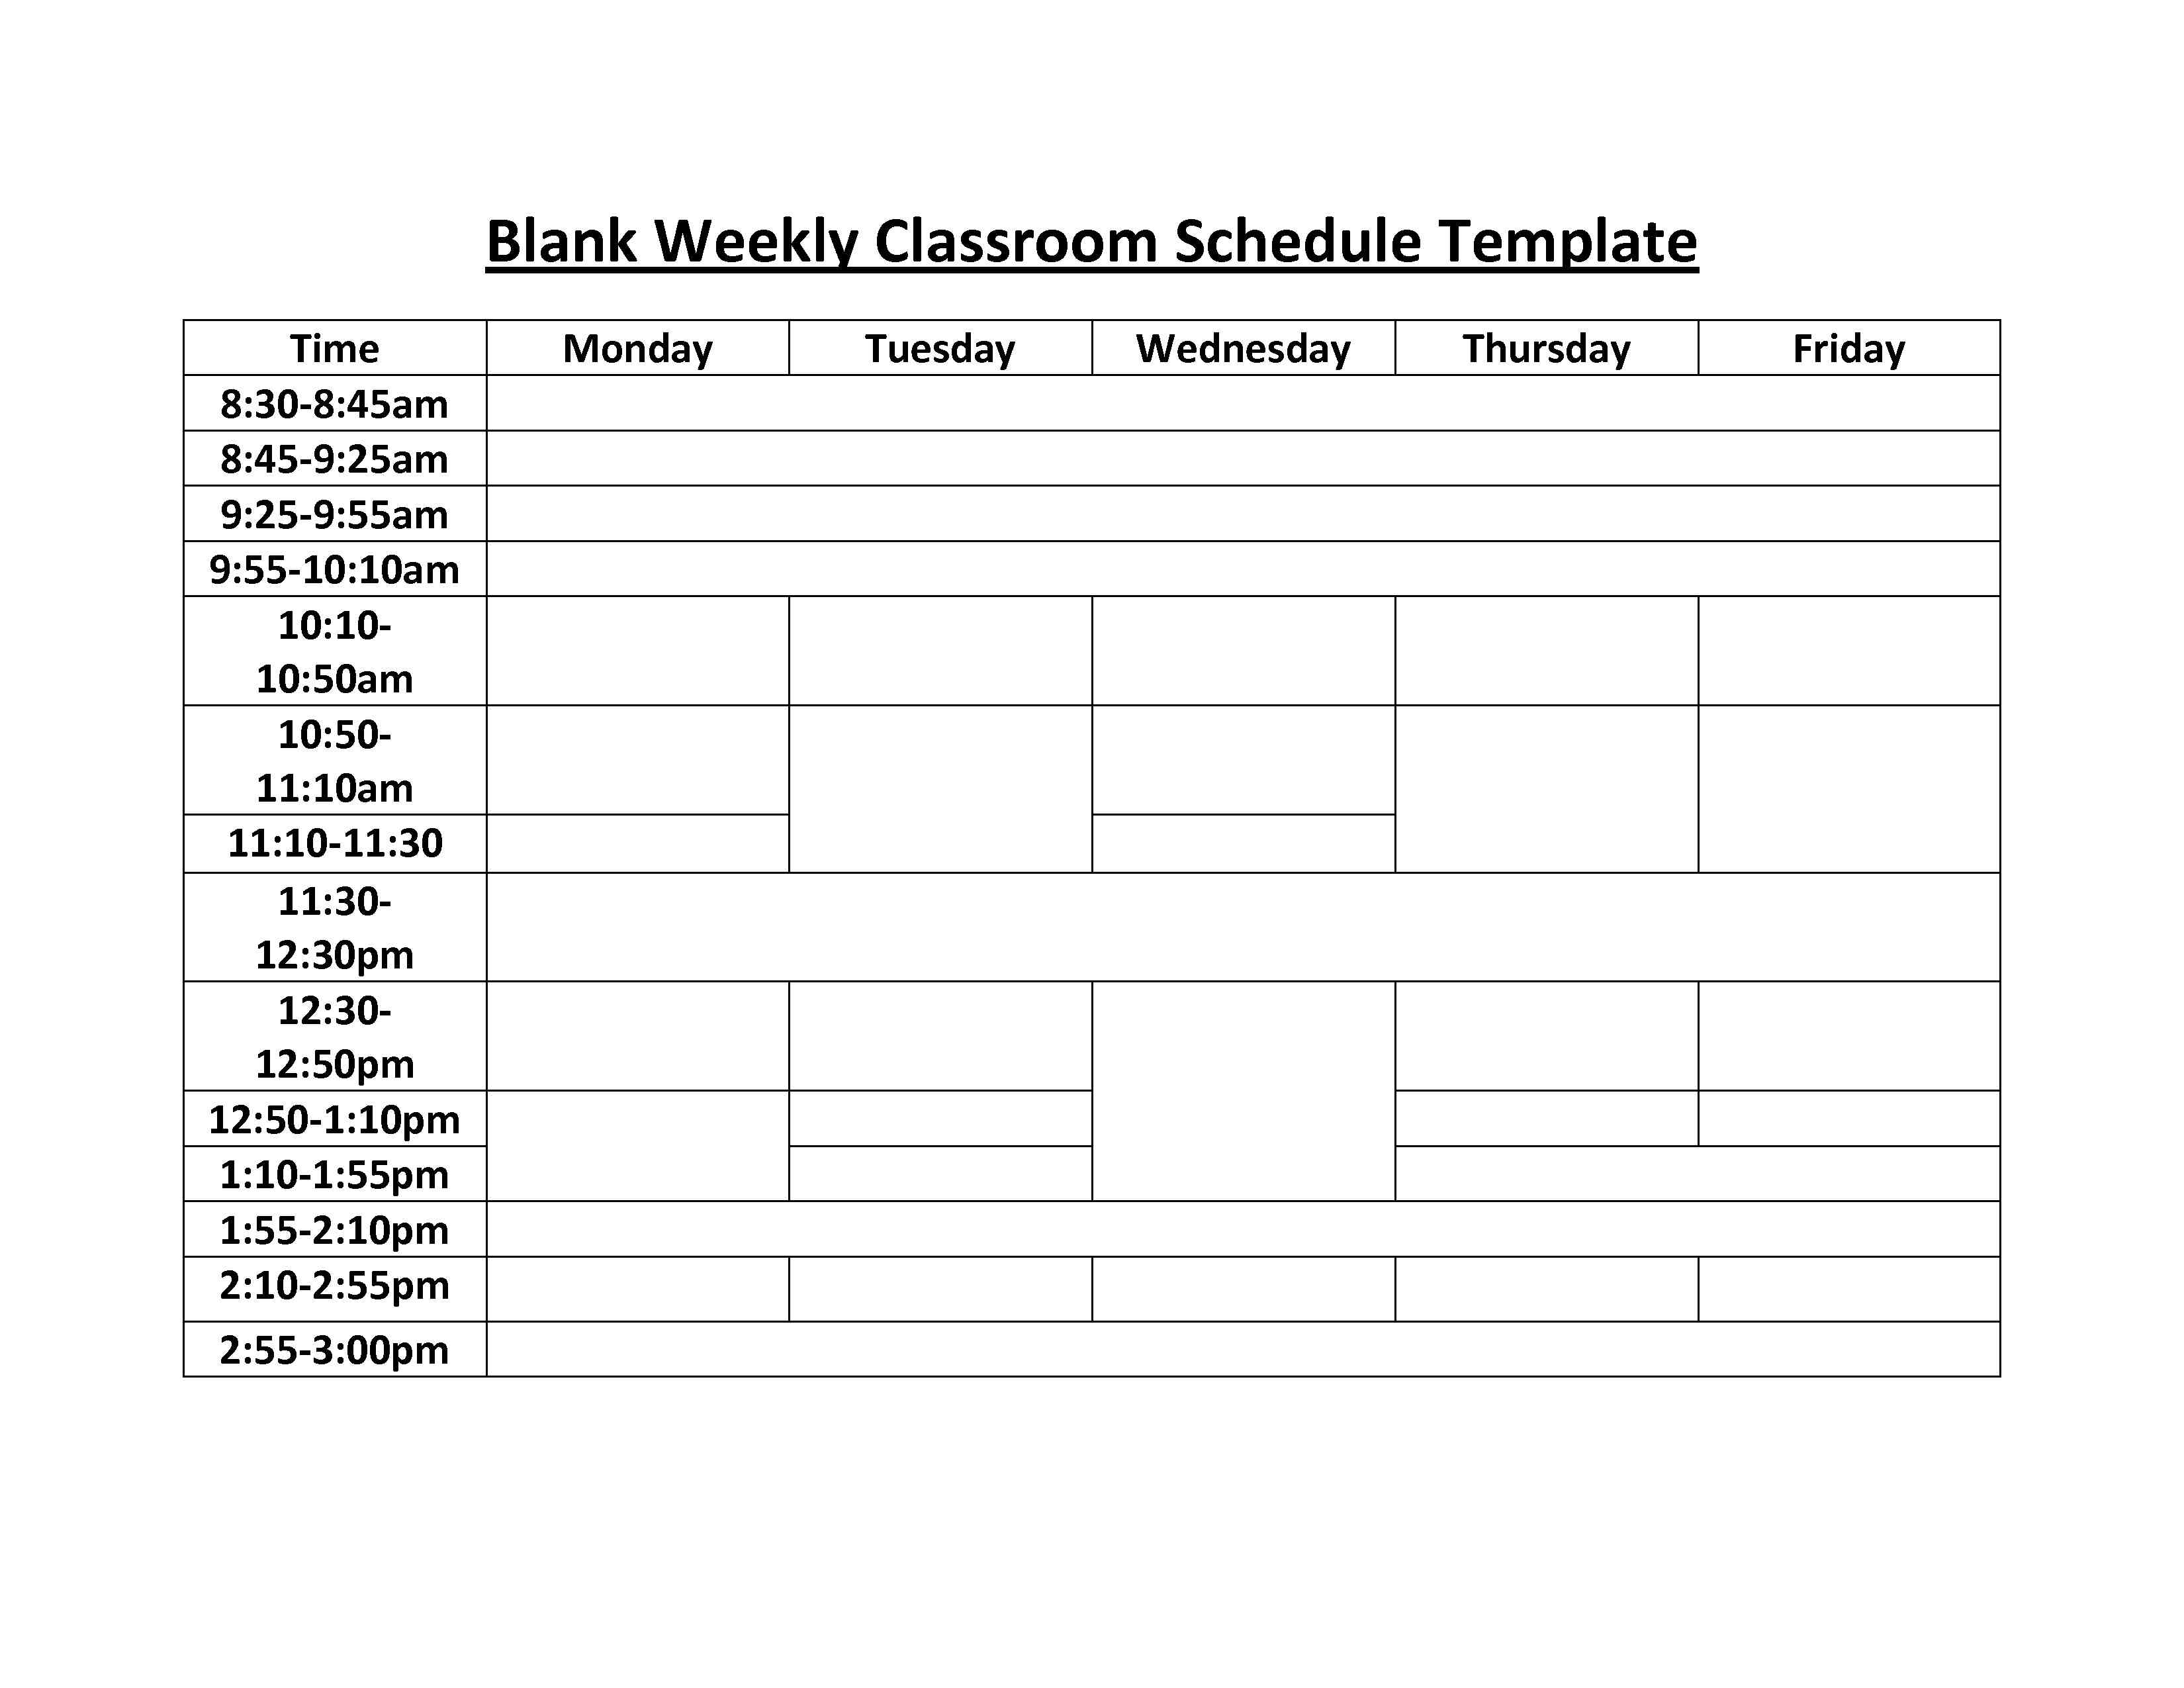 21 Images Of Elementary School Schedule Template Blank throughout Blank Class Schedule Template